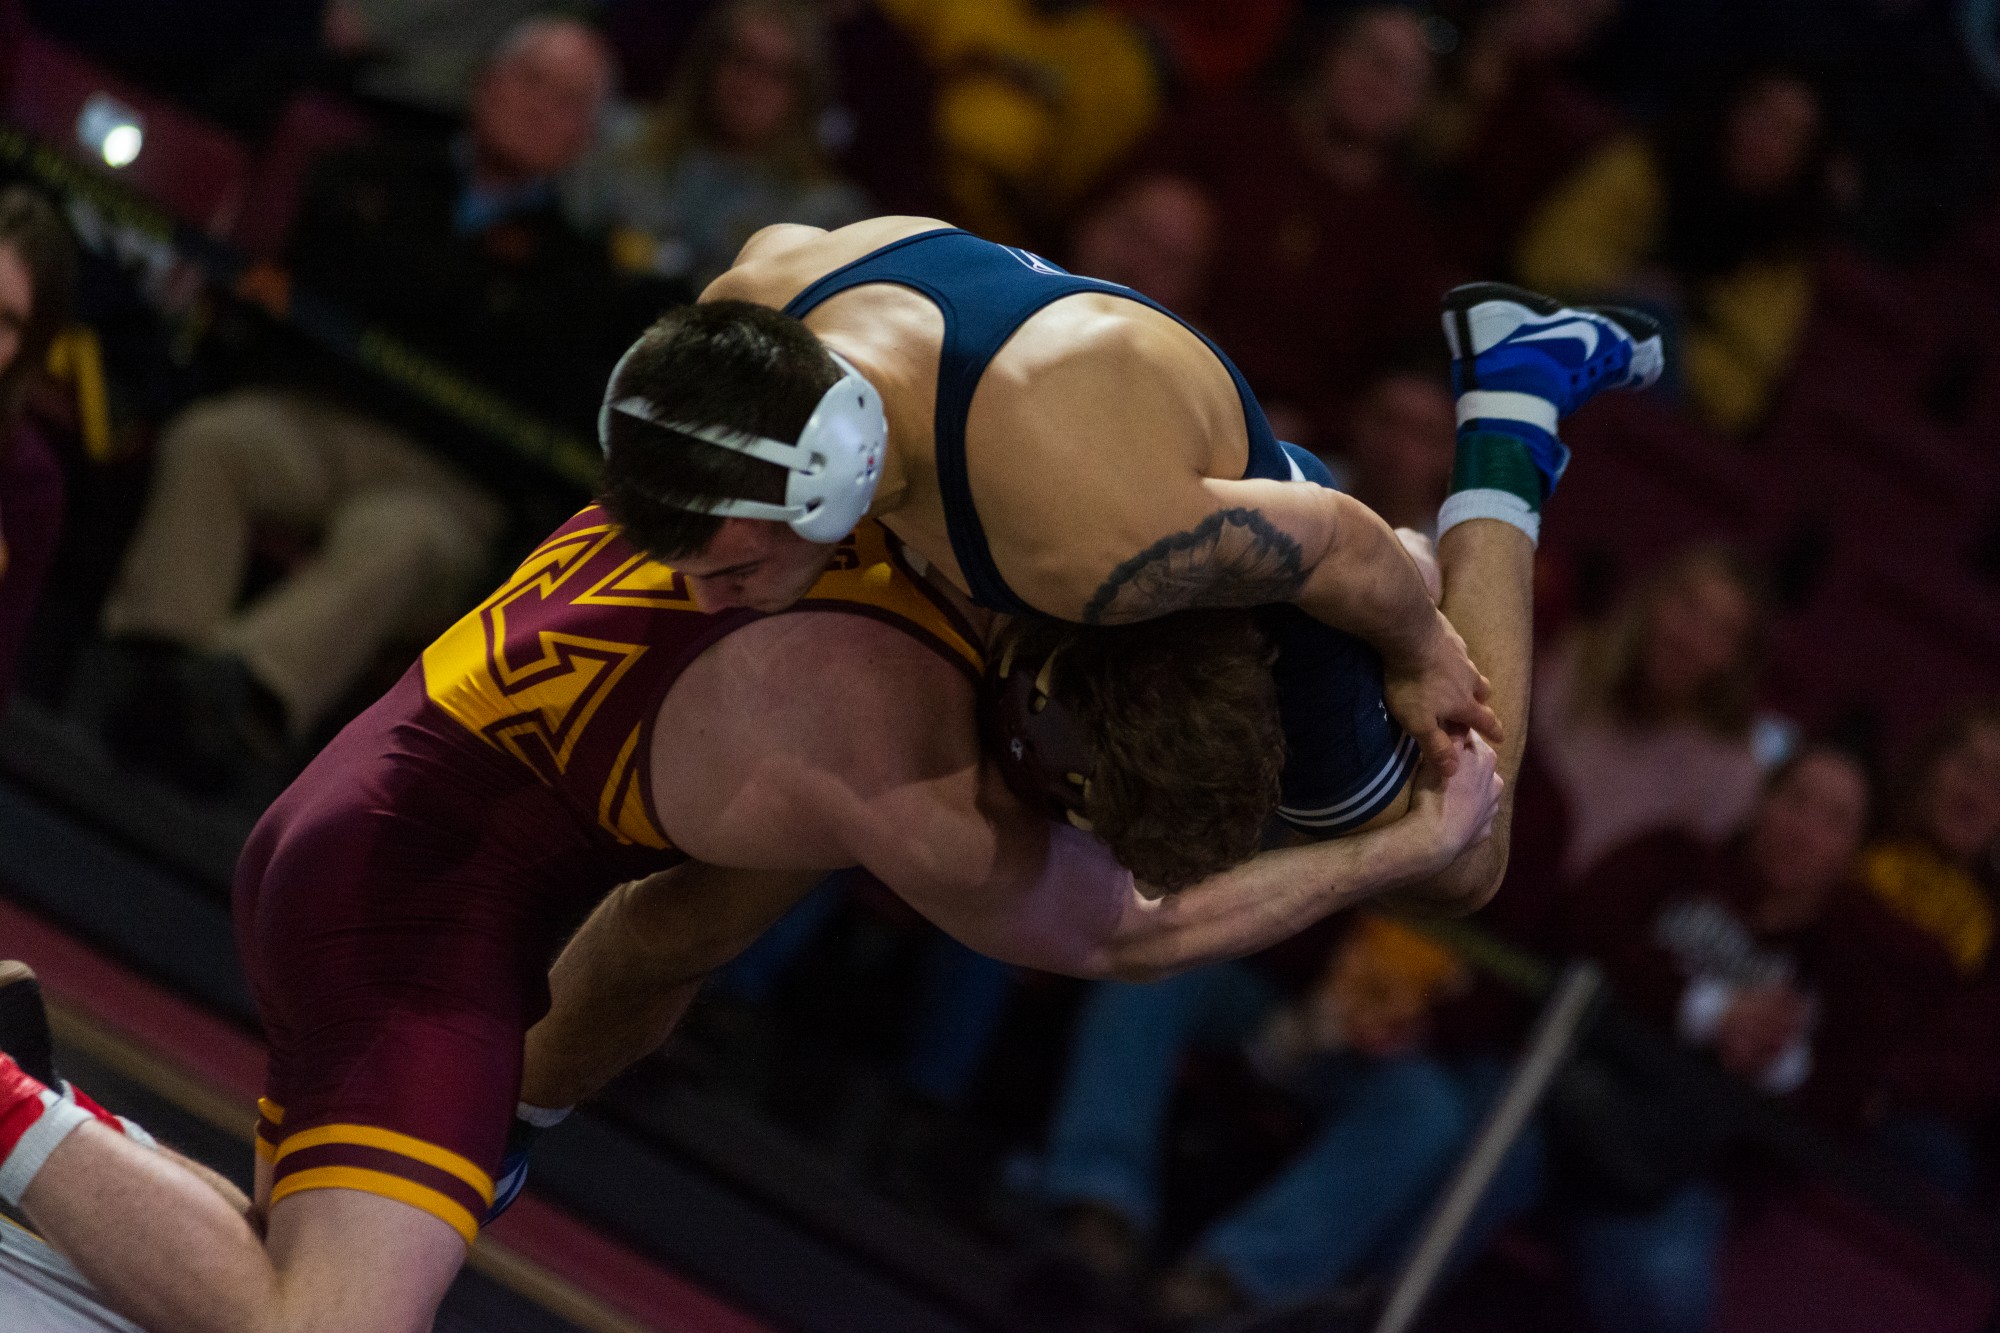 Gophers Redshirt Sophomore Bailee O’Reilly takes down his opponenet at Maturi Pavilion on Sunday, Feb. 9. The Gophers lost to Penn State 31-10.